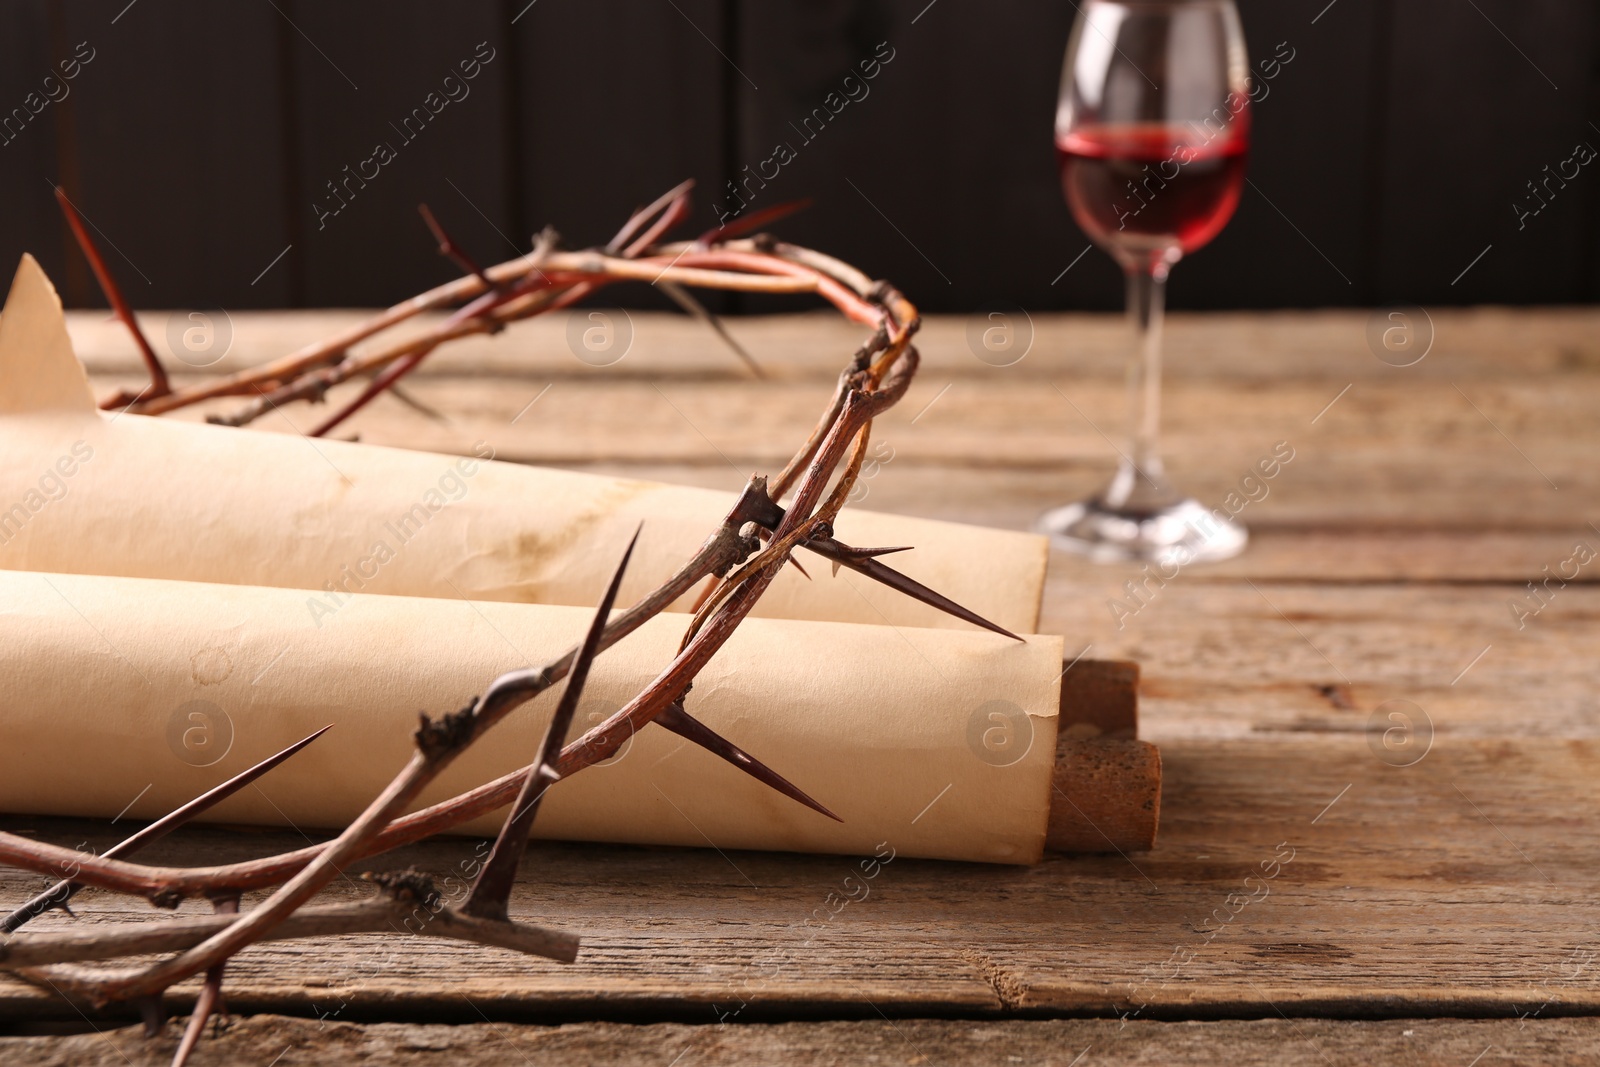 Photo of Crown of thorns, old scrolls and glass with wine on wooden table, selective focus